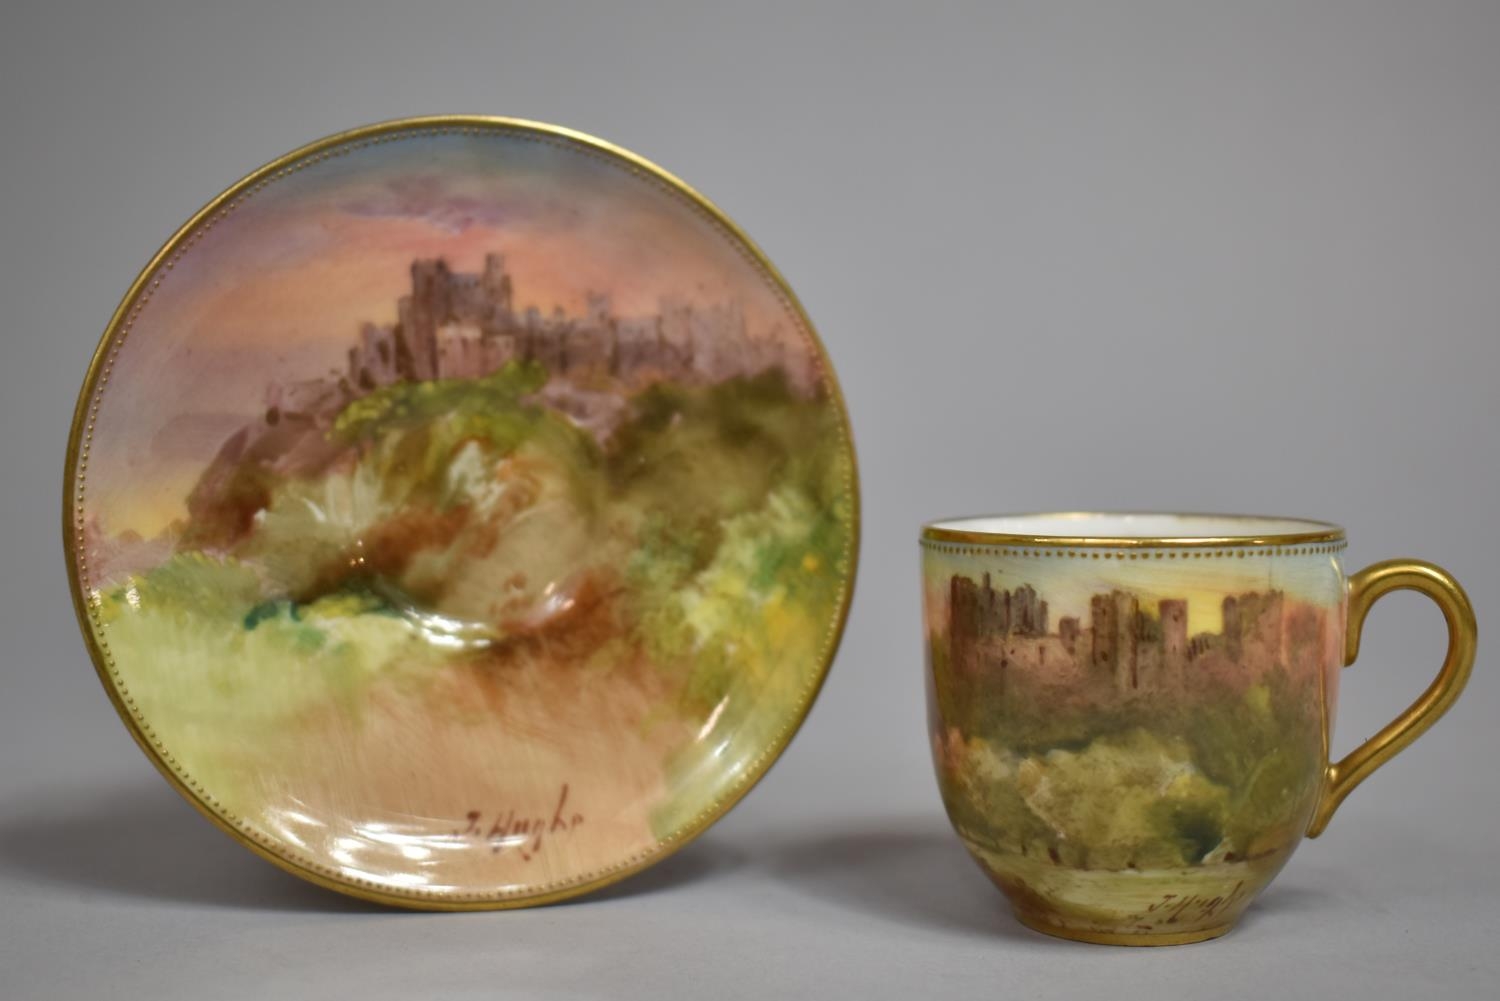 A Miniature Royal Doulton Cabinet Cup and Saucer, Hand Painted Ludlow Castle Design by J Hughes